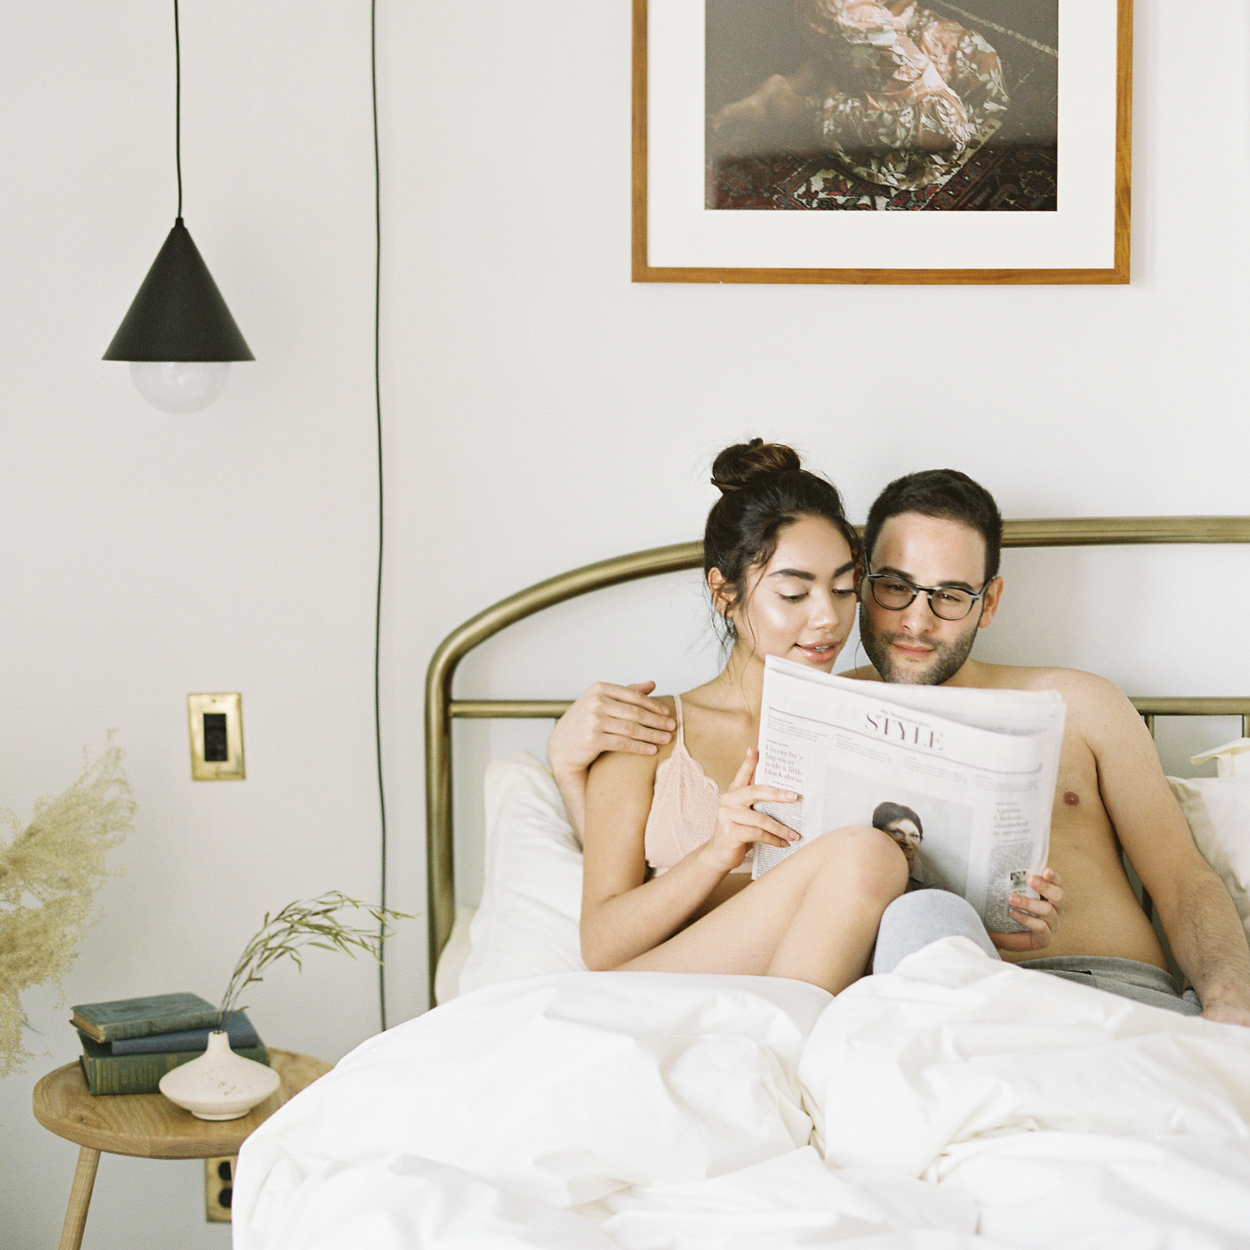 Two people sitting up in bed reading a newspaper together